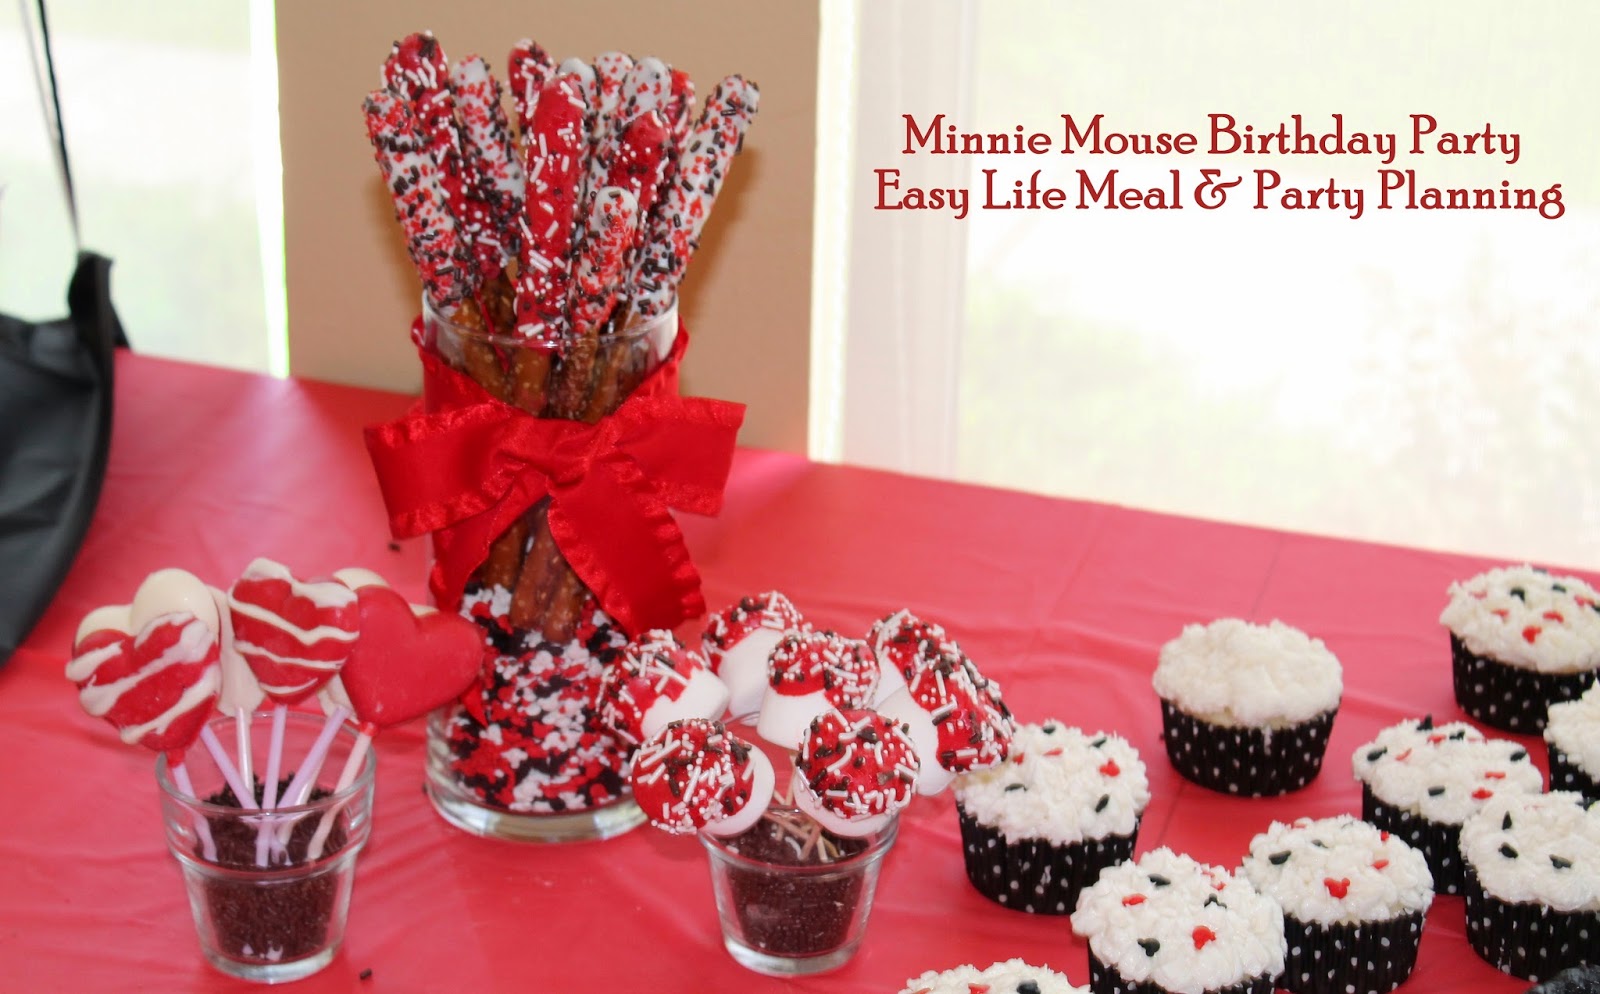 It's a Party - Minnie Mouse Birthday Party - Easy Life Meal & Party Planning